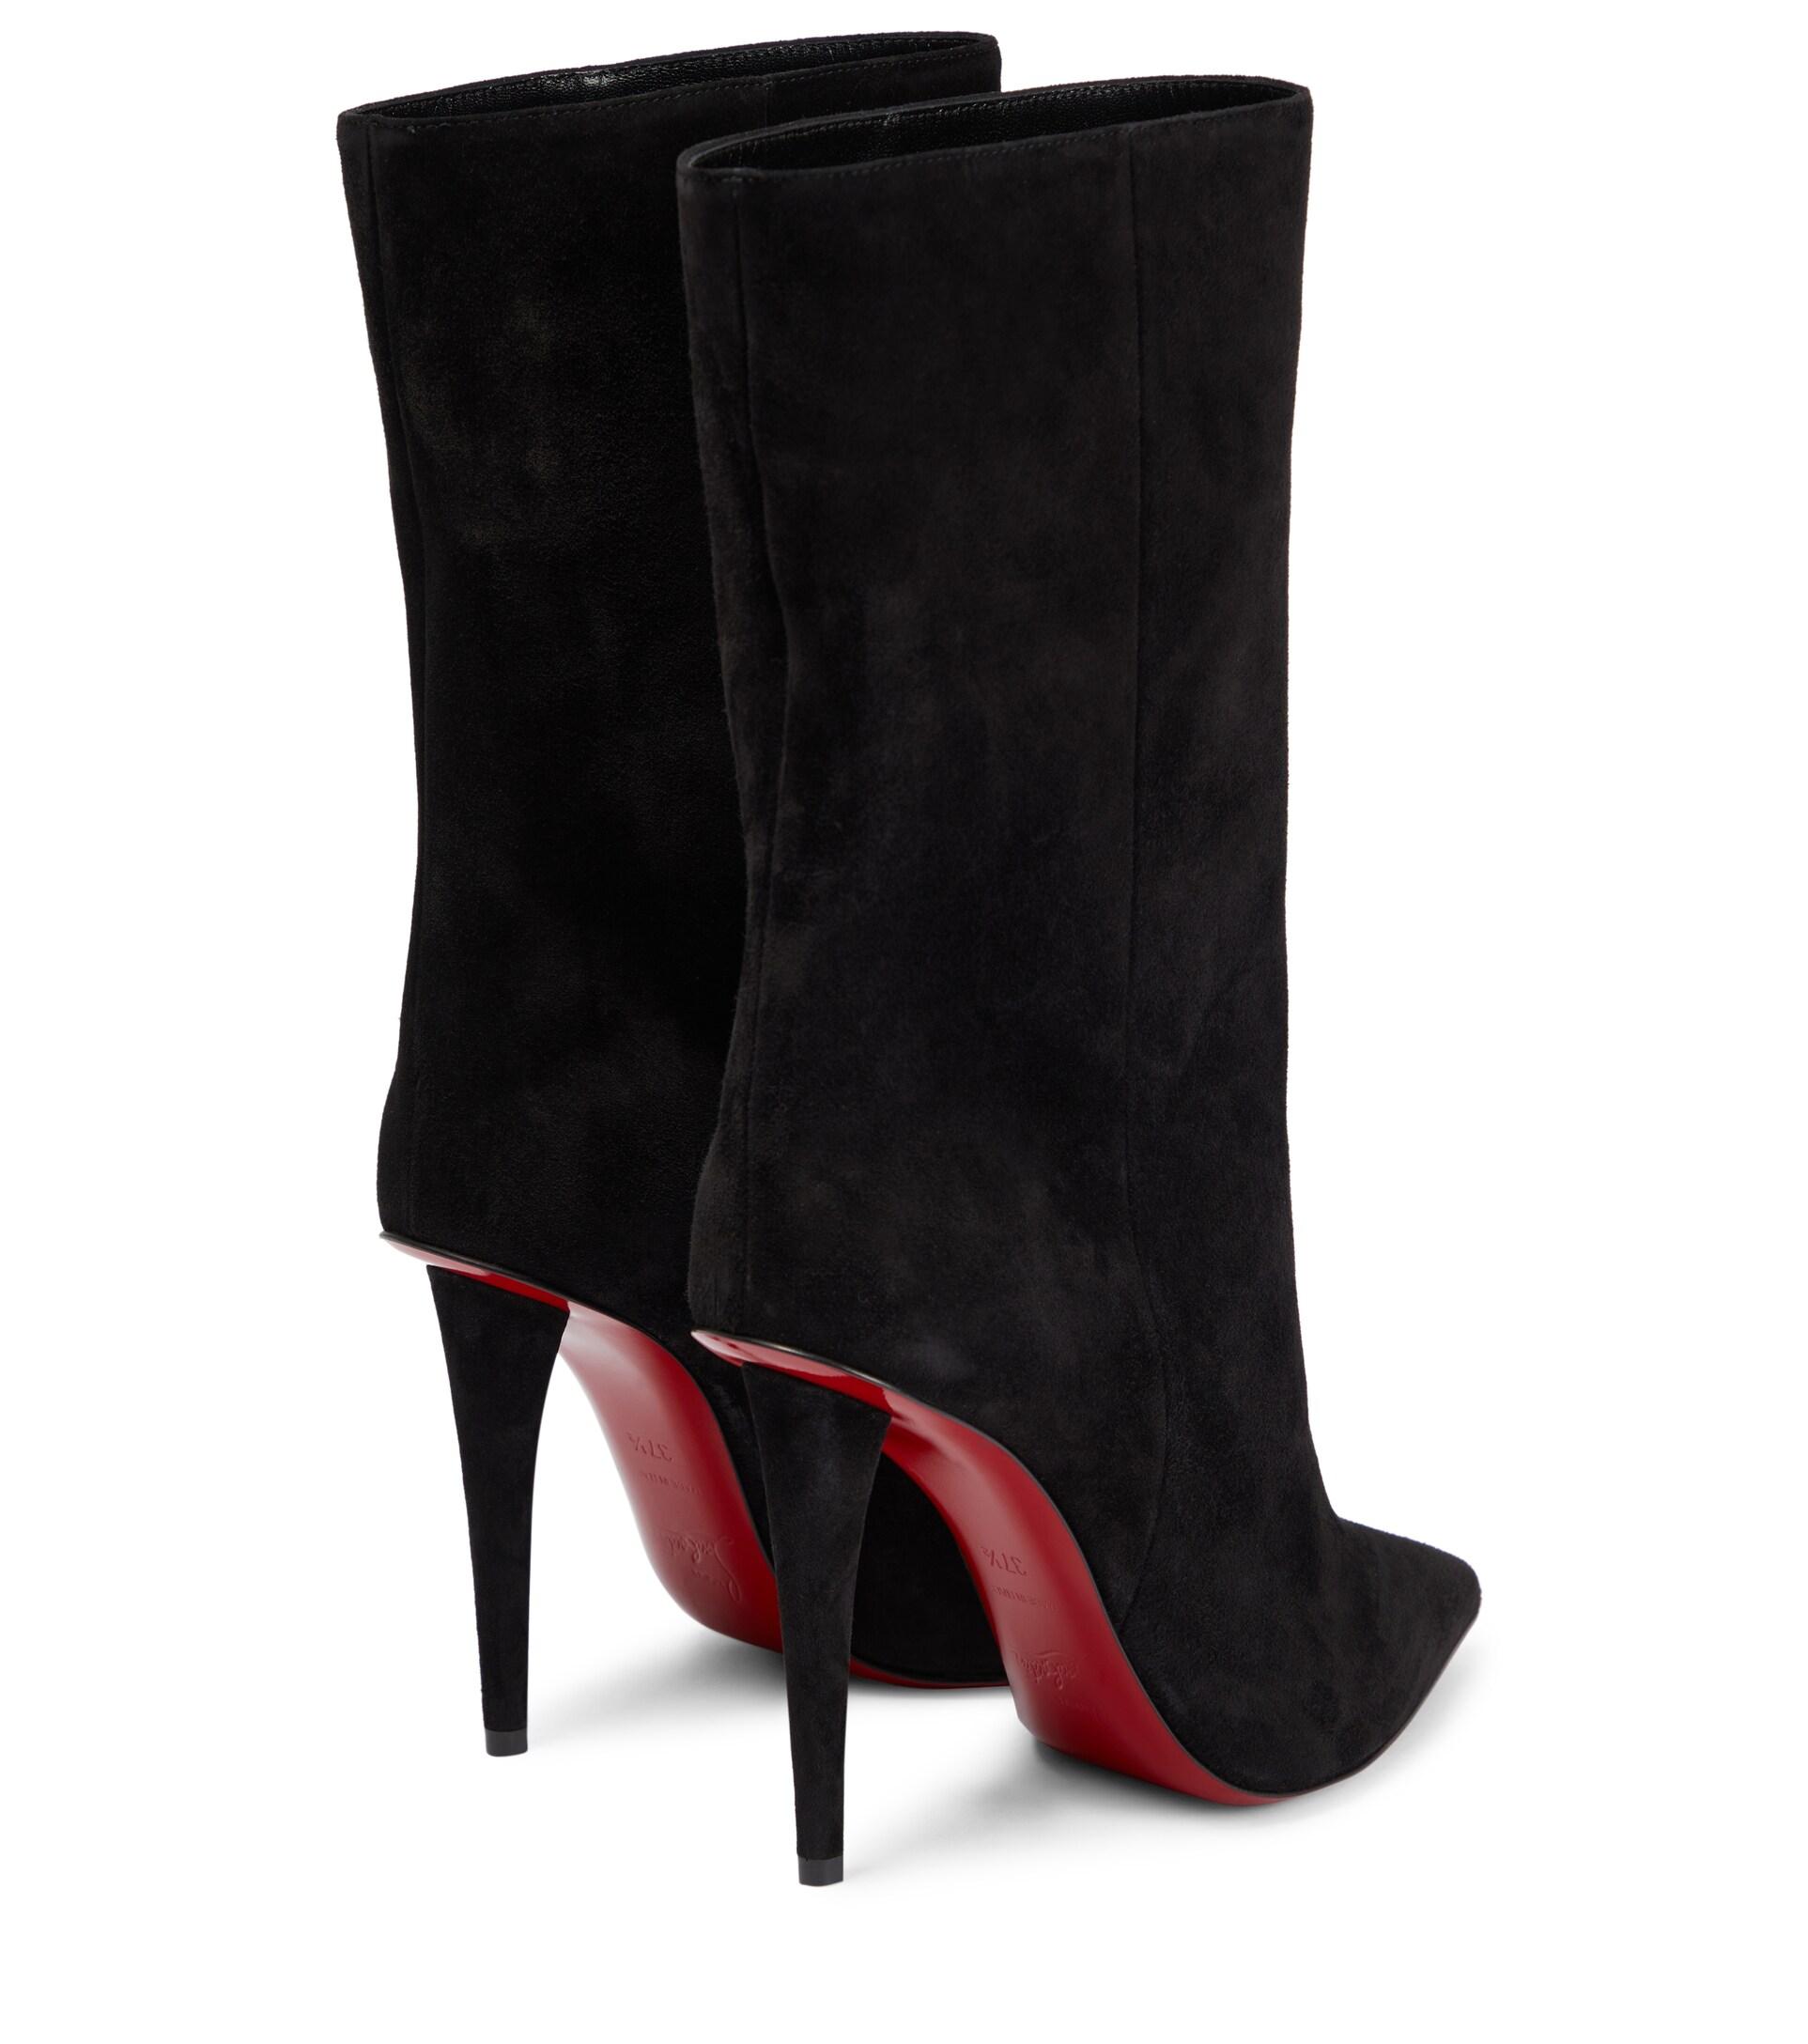 Christian Louboutin Astrilarge Suede Boots in Black | Lyst